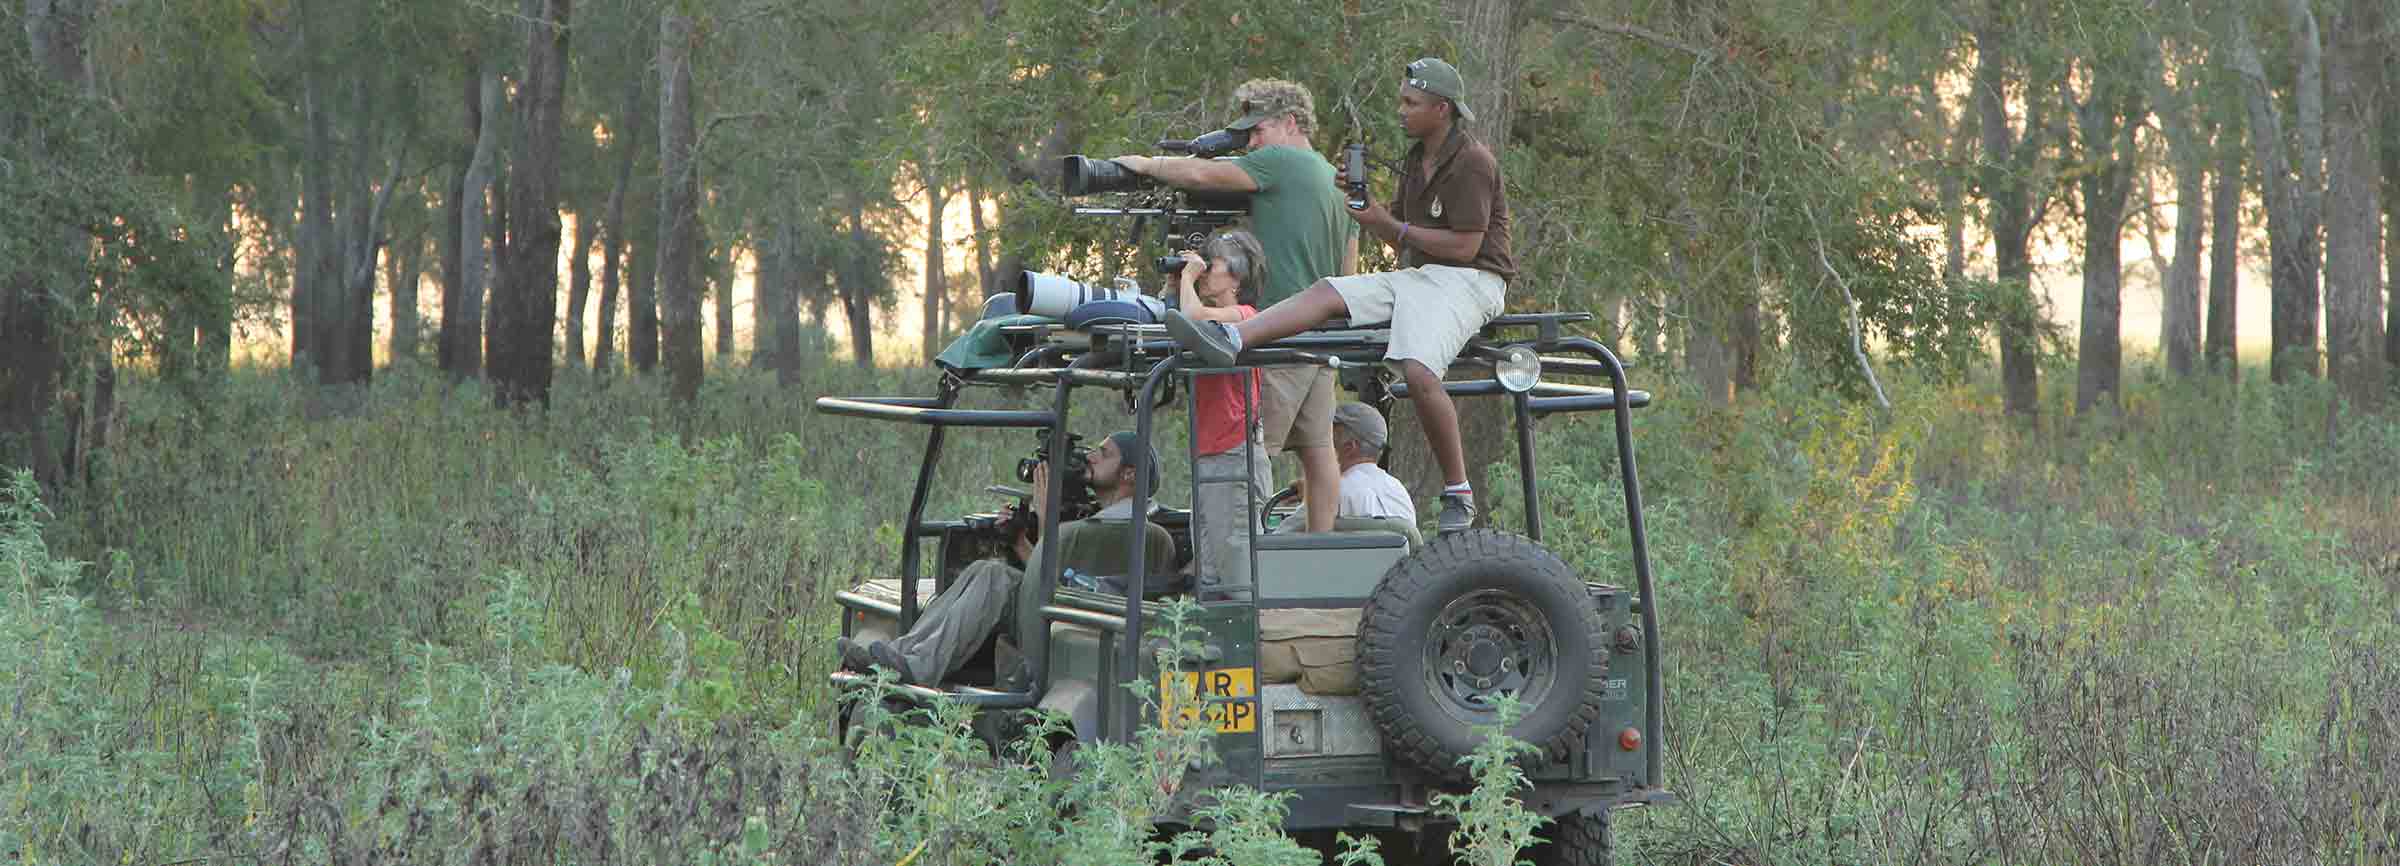 Documentary filming in Gorongosa, Mozambique.